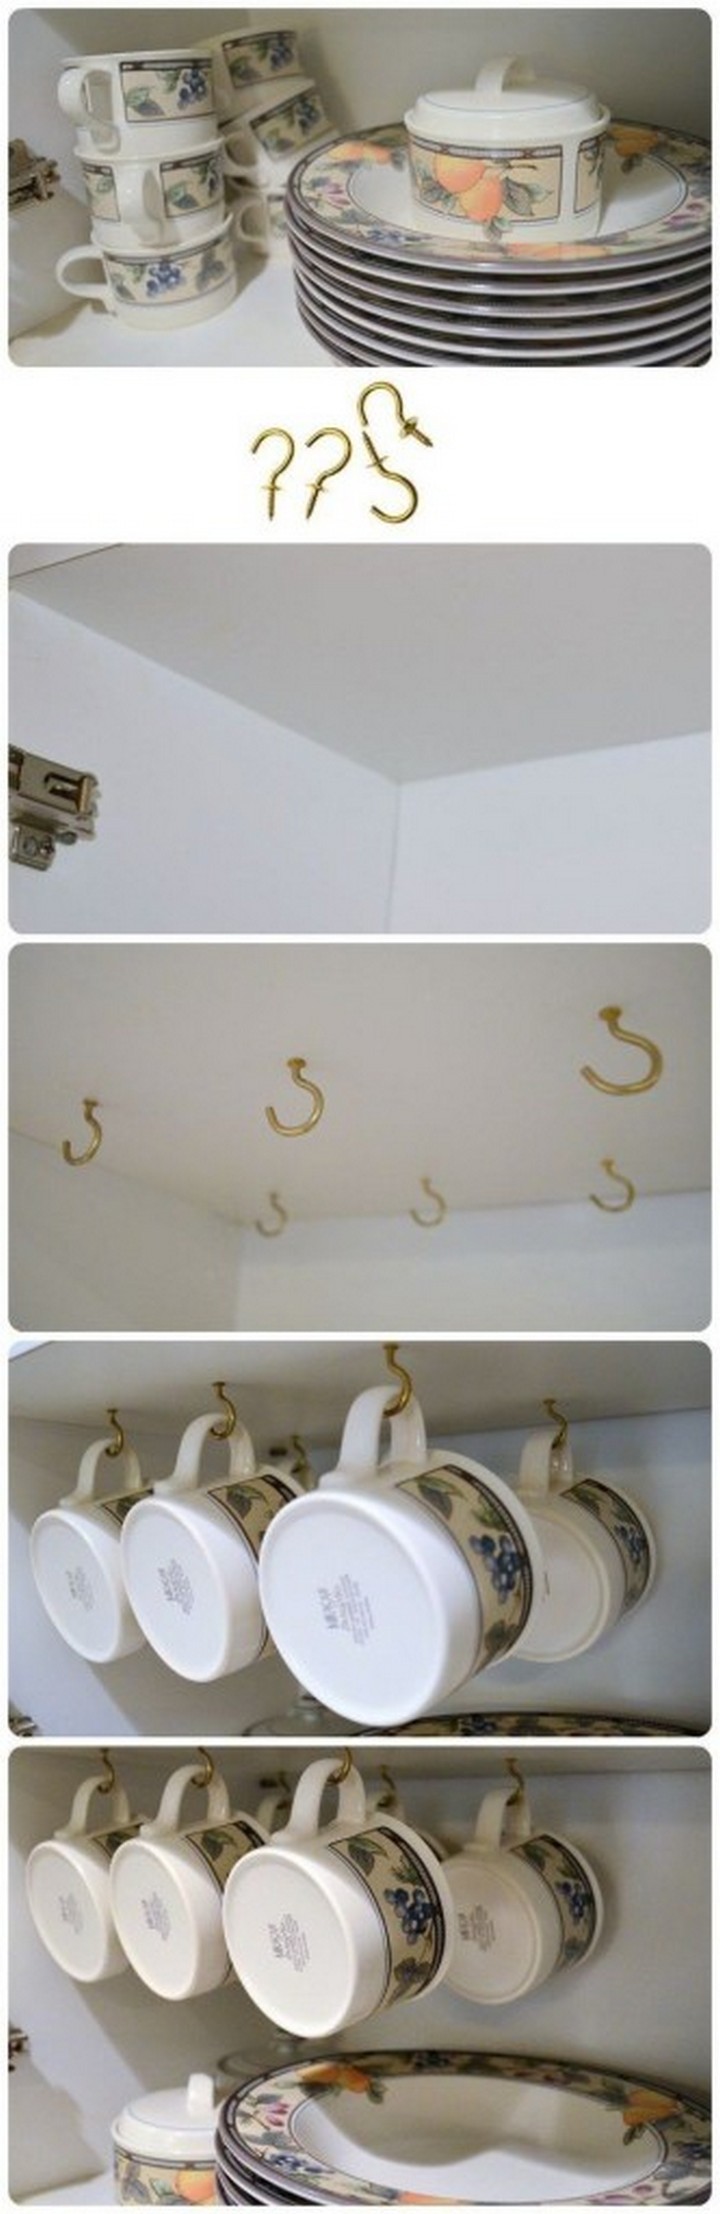 46 Useful Storage Ideas - Hang your cups on hooks and create more shelving space.